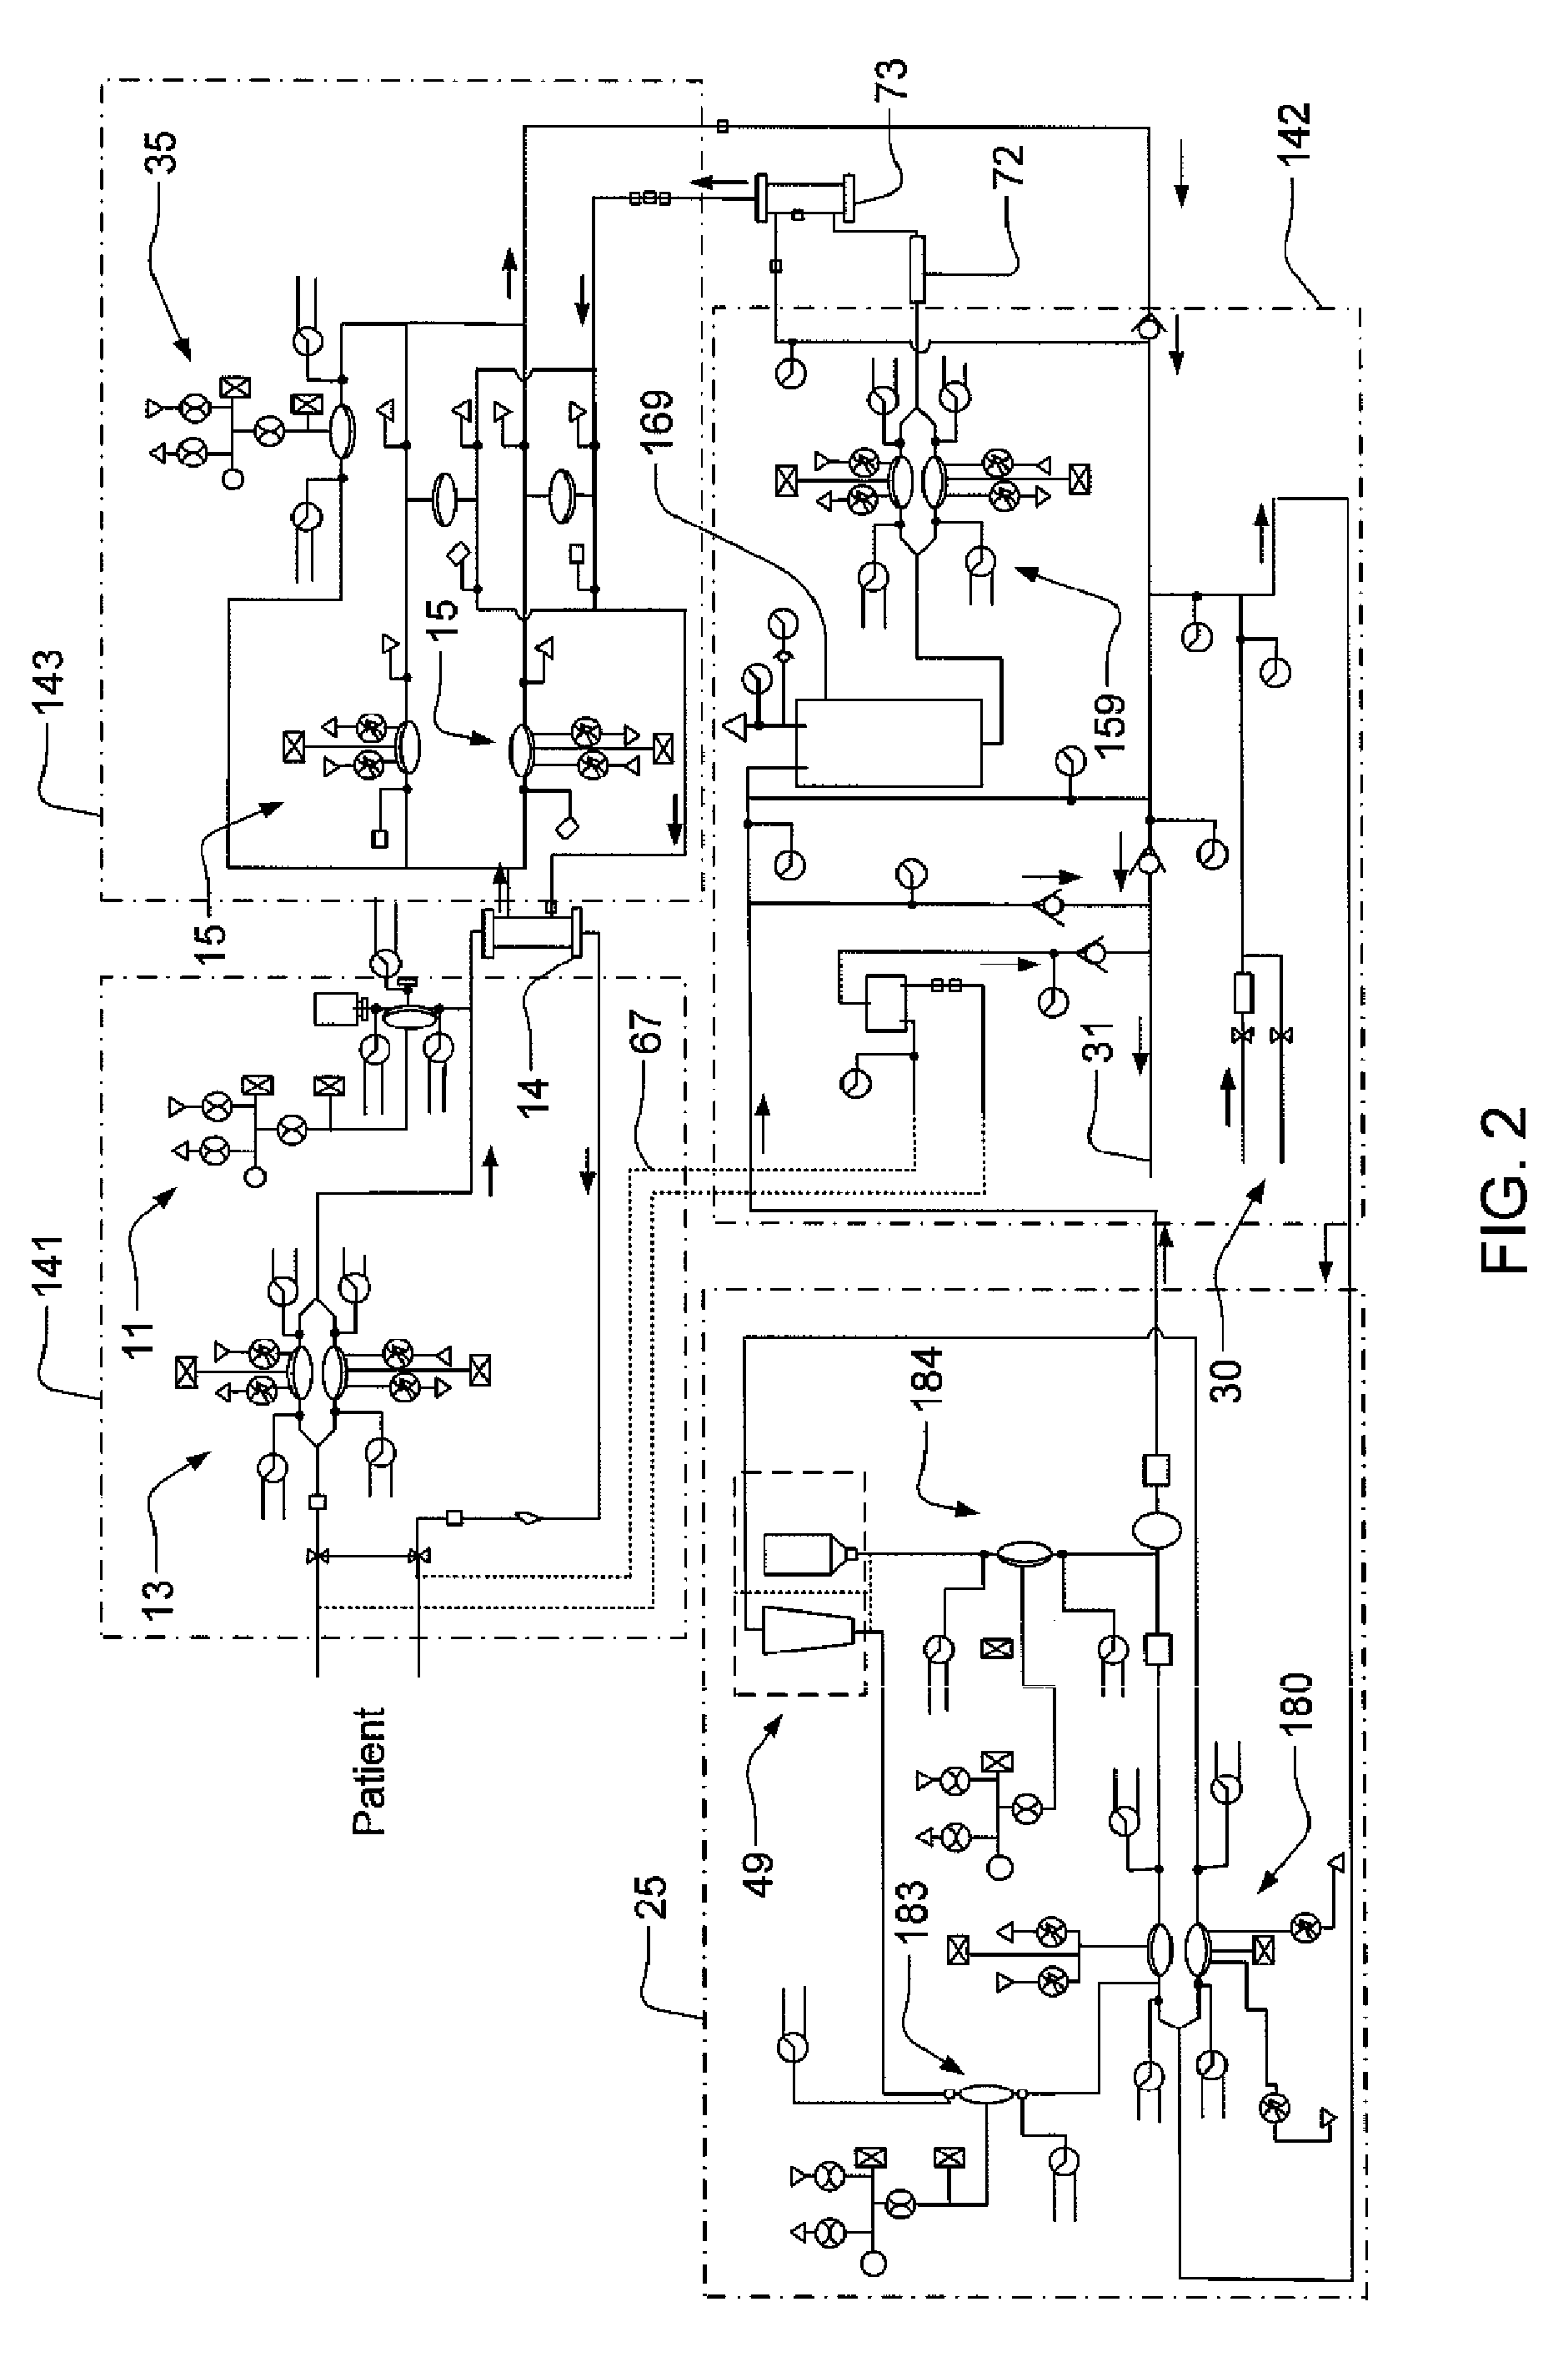 Blood line connector for a medical infusion device